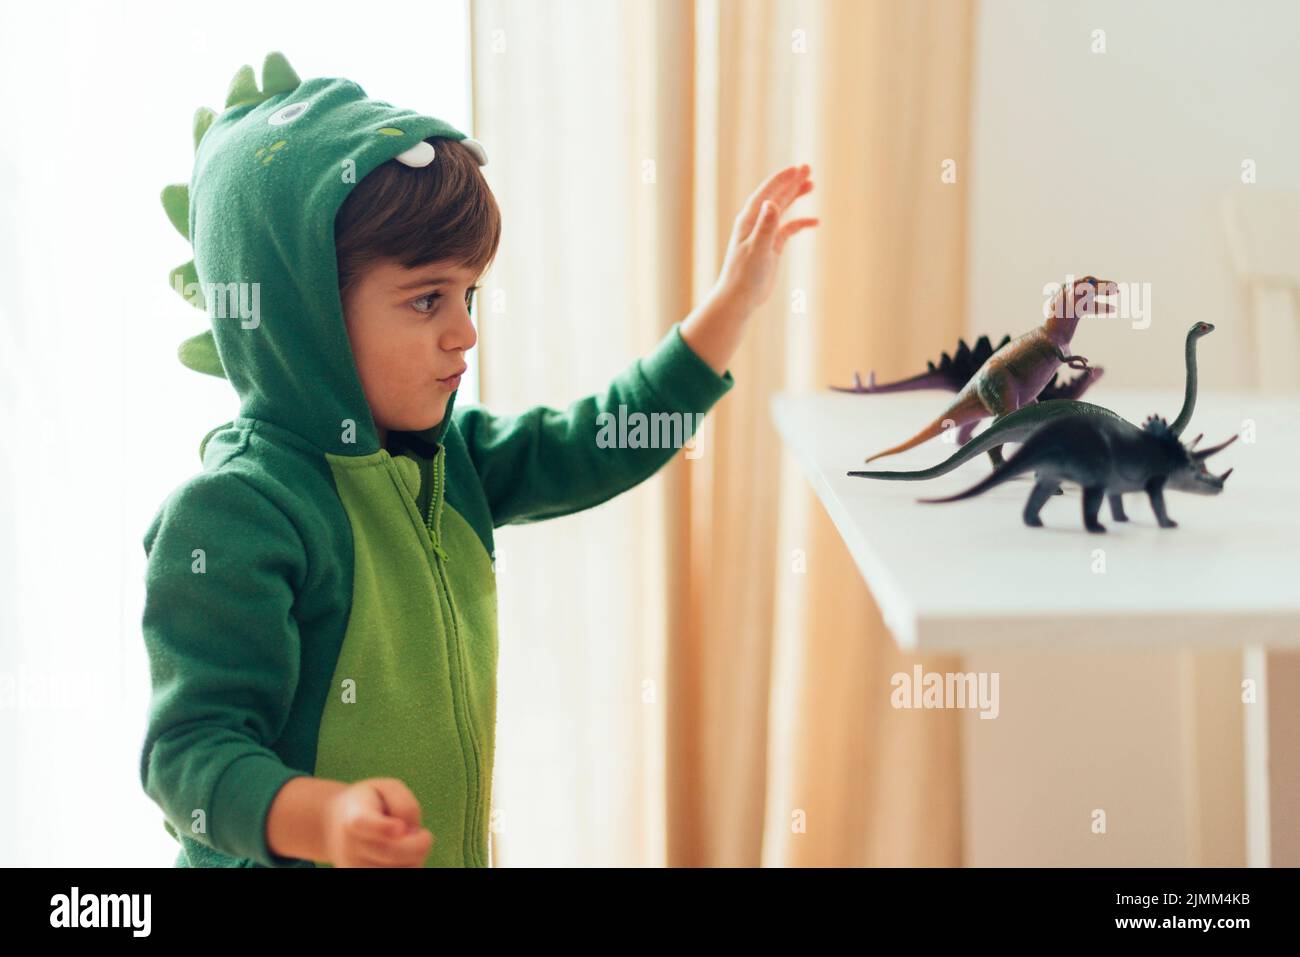 Kid playing with toy dinosaurs Stock Photo